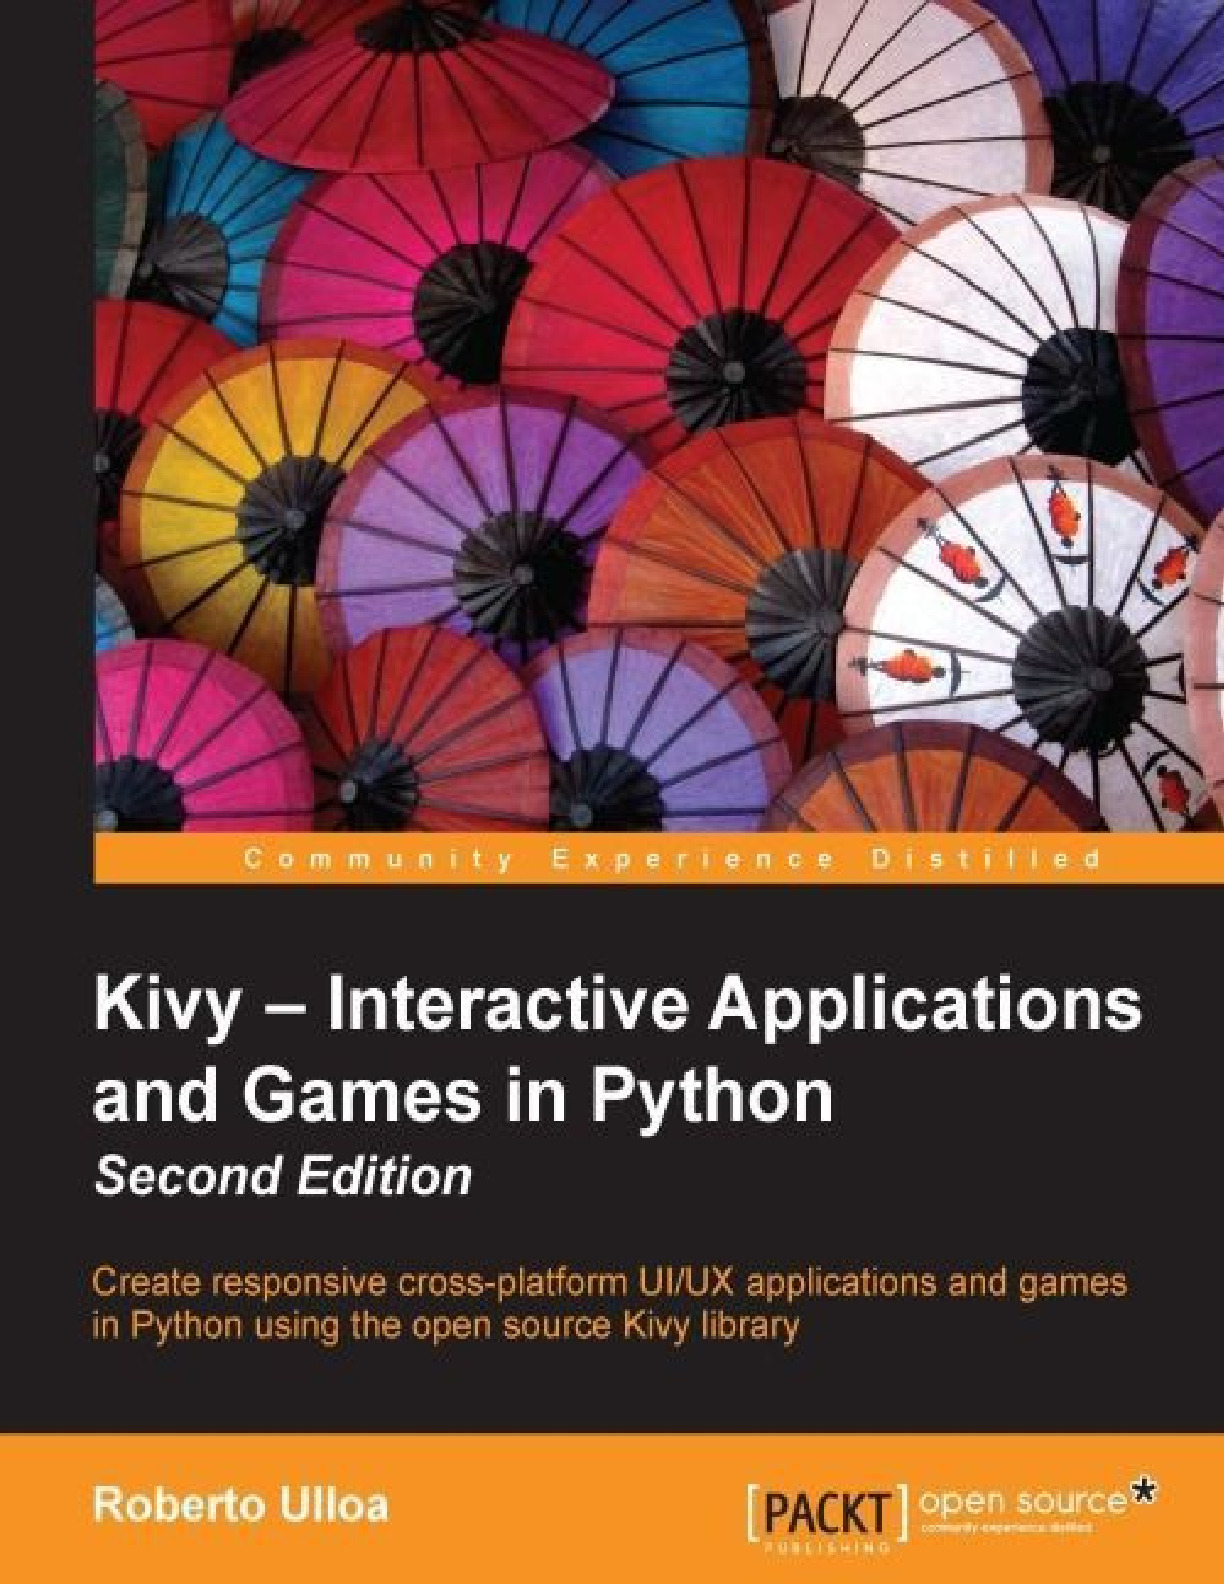 kivy_interactive_applications_and_games_in_python